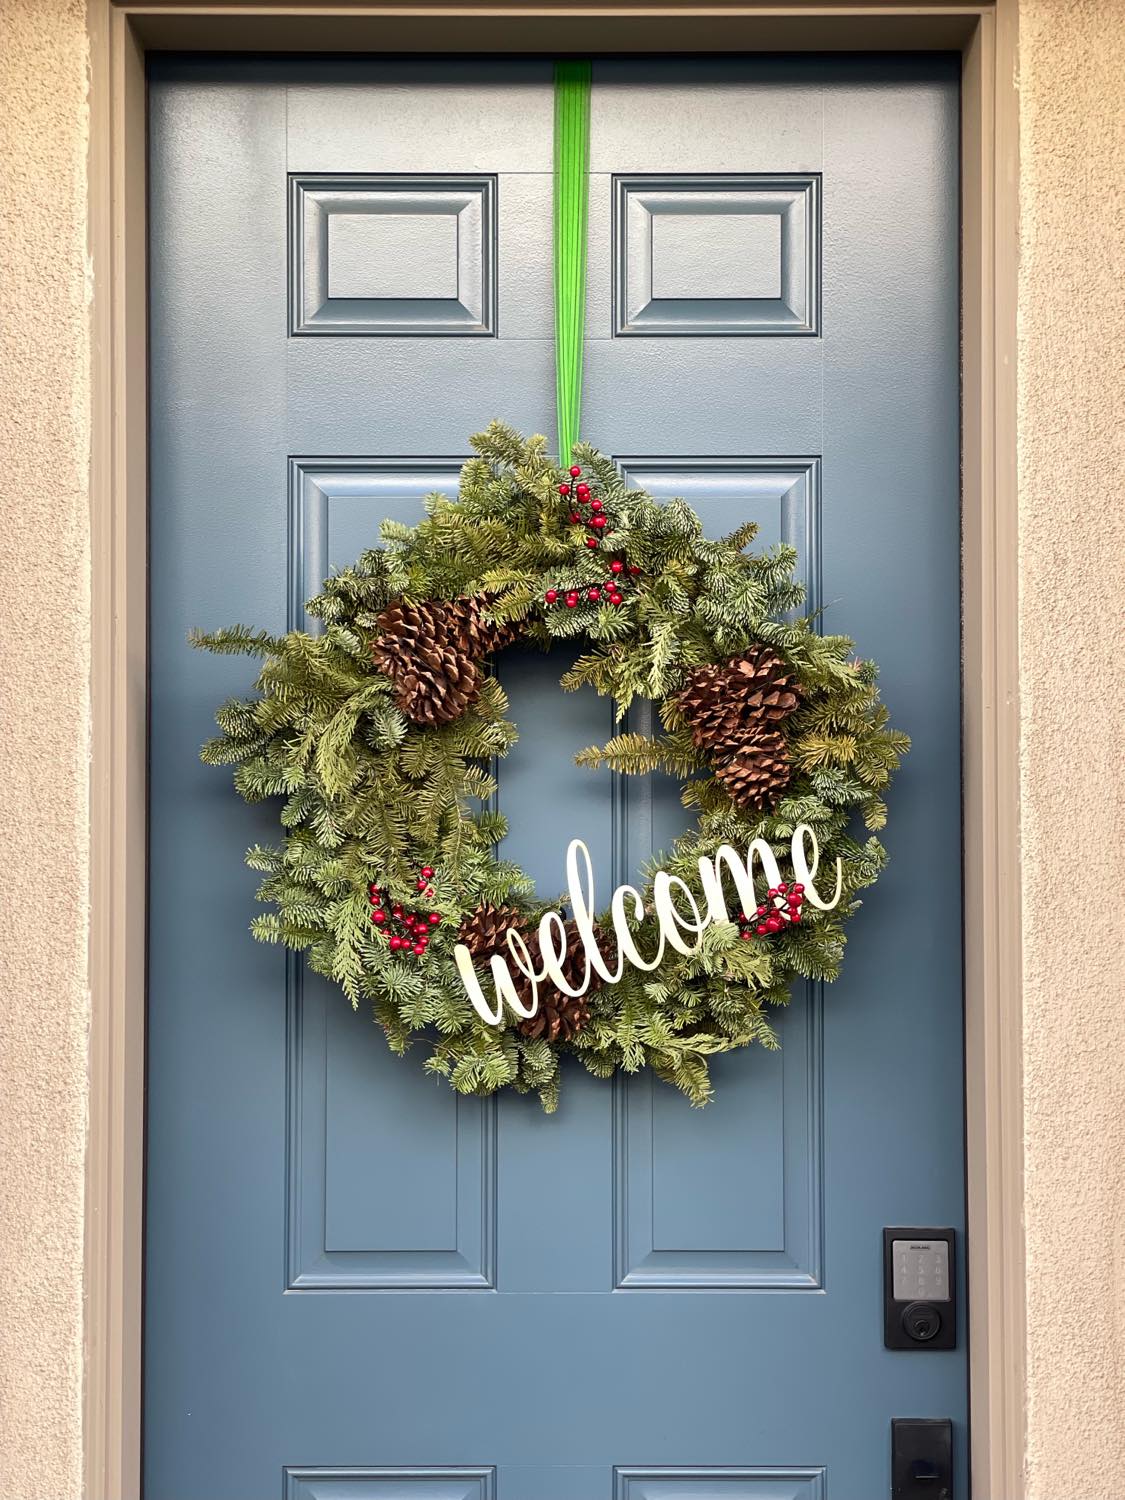 Welcome sign on christmas wreath hanging on front door of the house